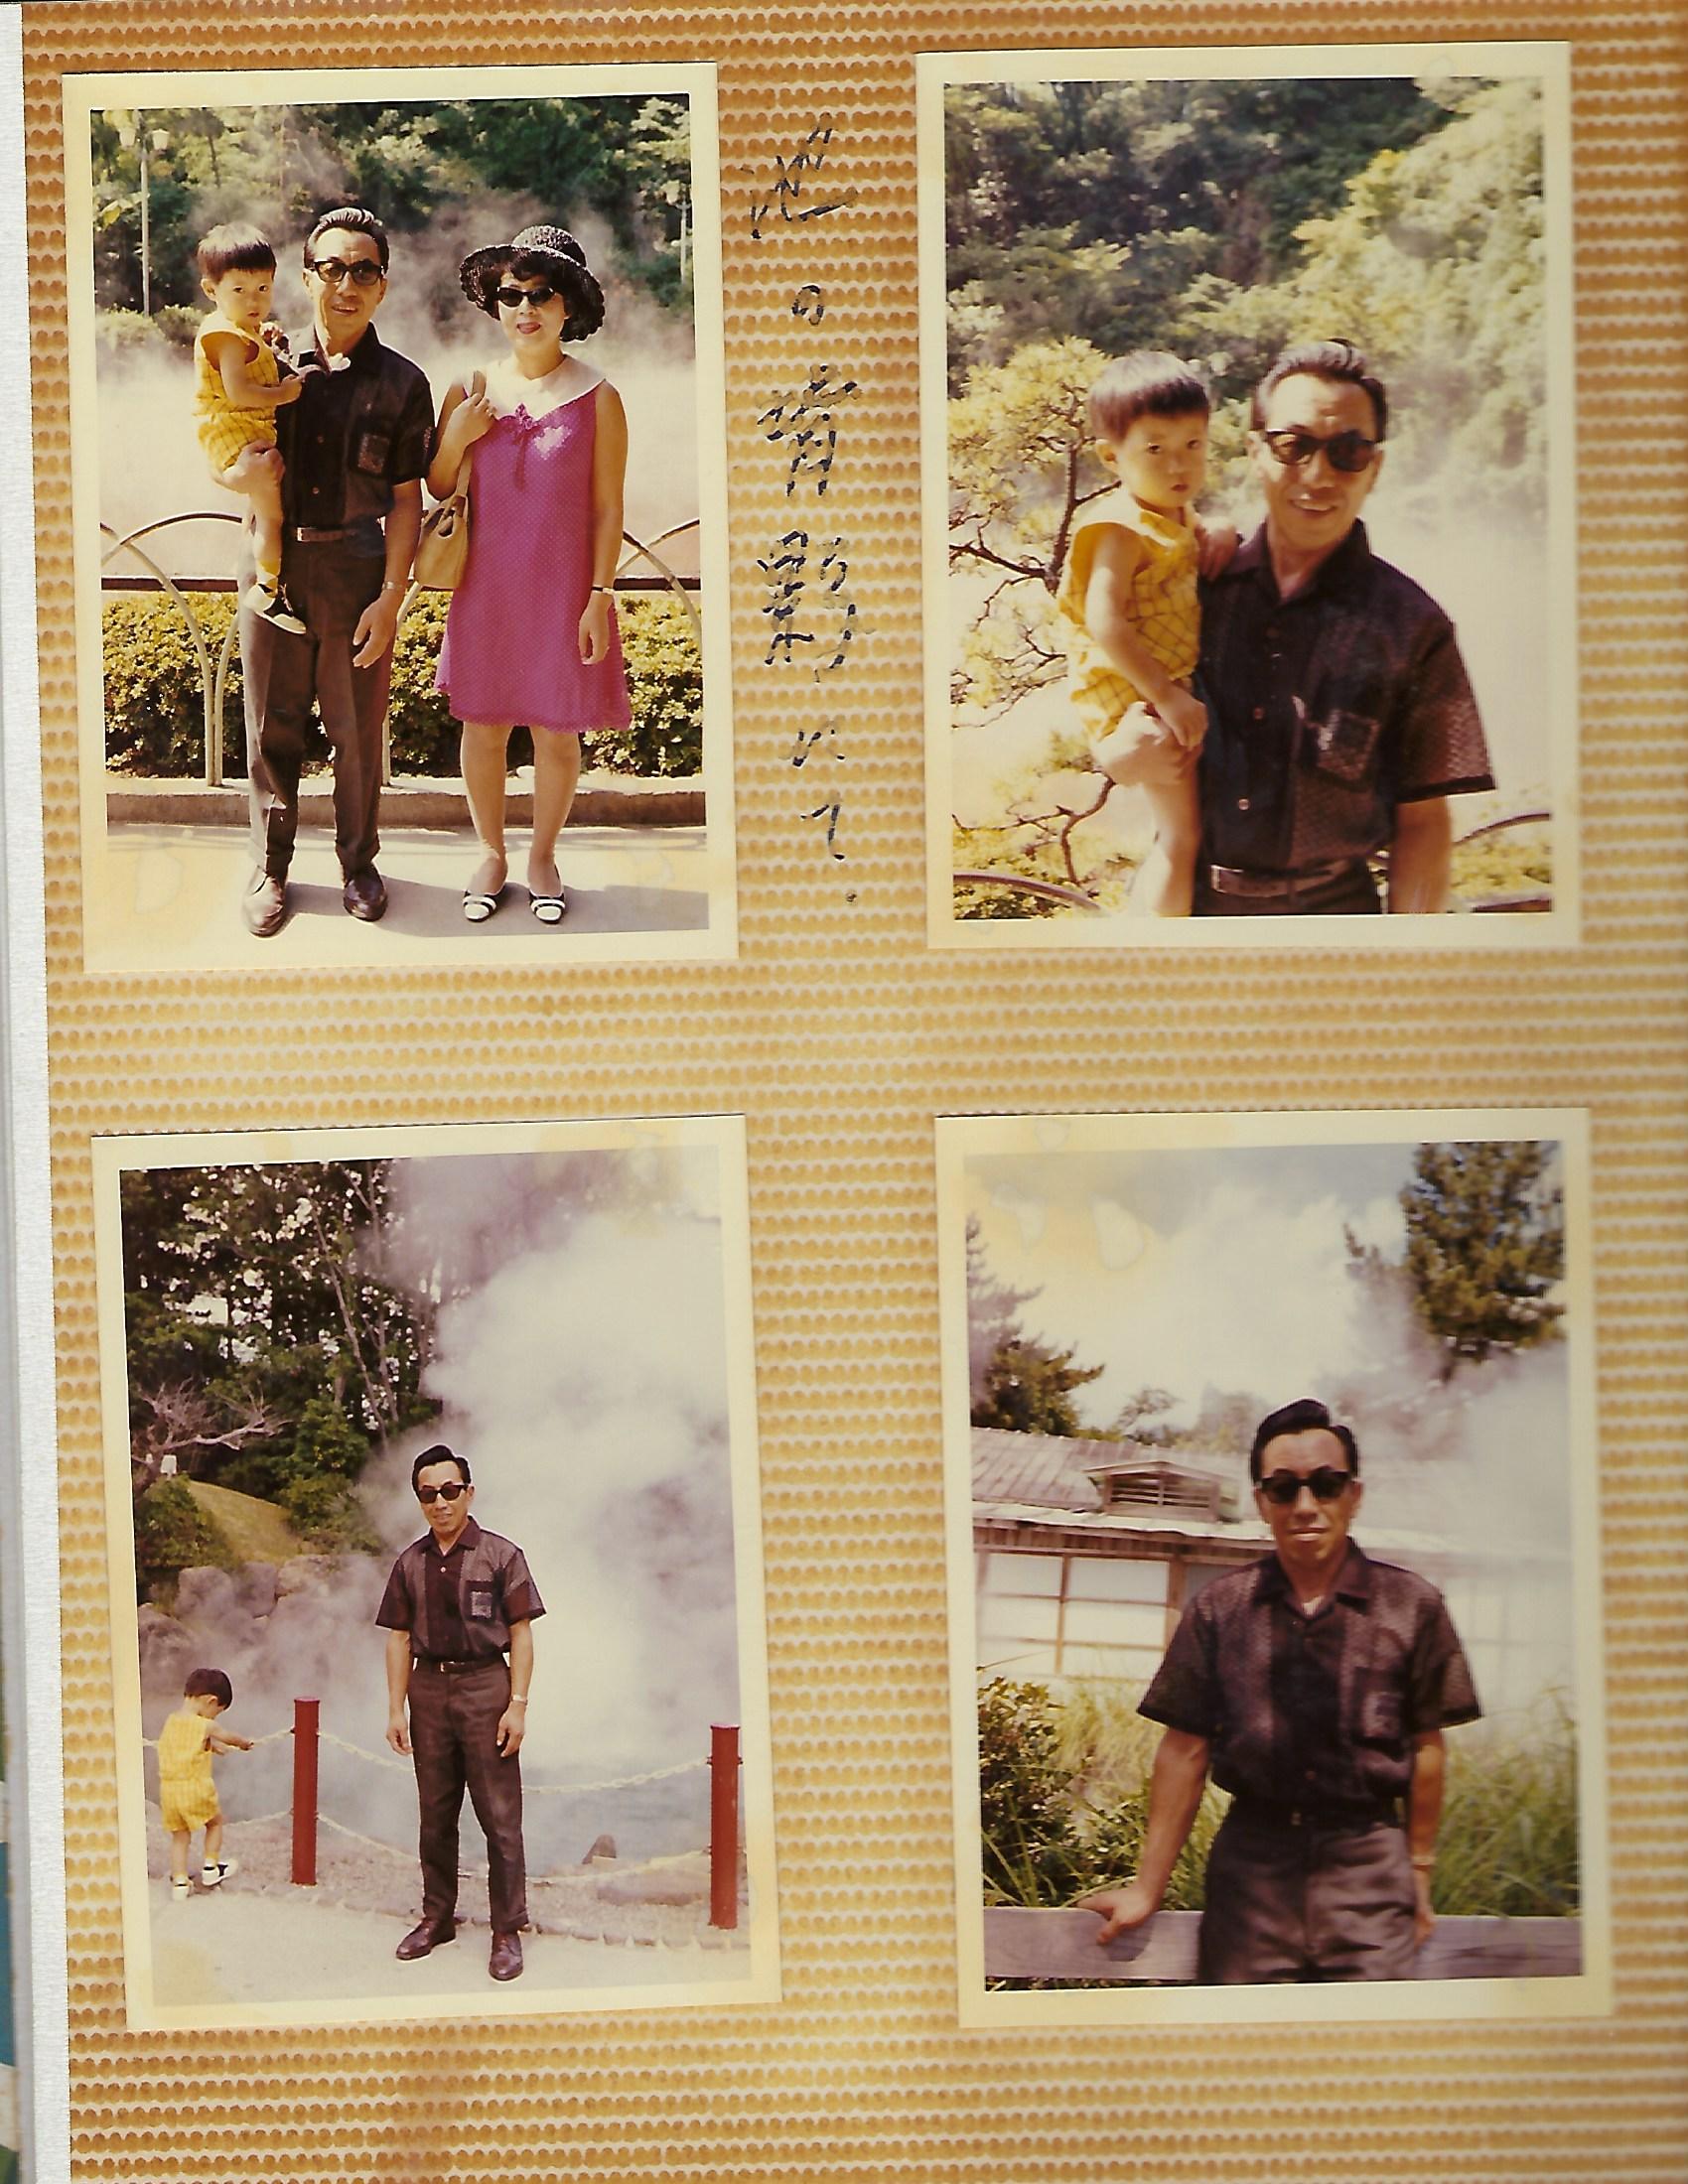 Photograph of family. Small boy, father, and mother in Japan. Nature background. 